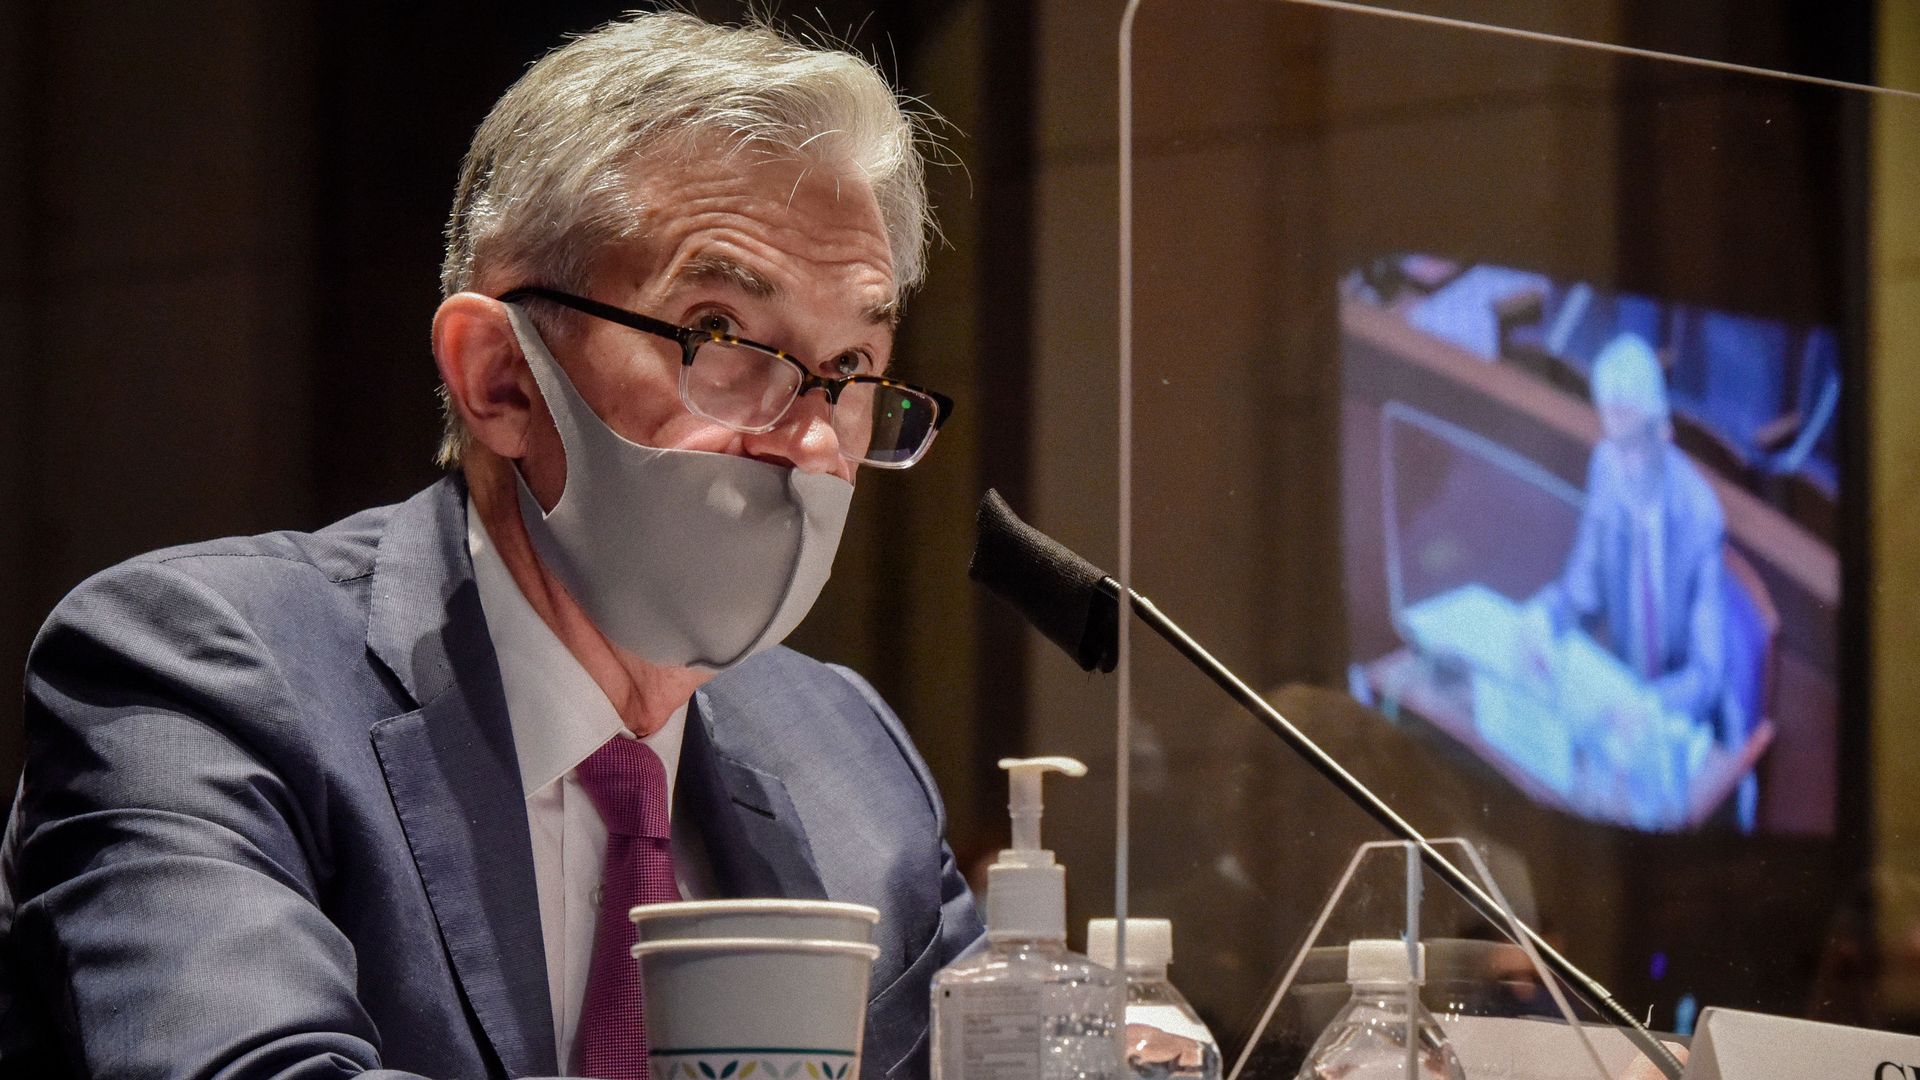 Fed chairman Jerome Powell behind a plexiglass barrier during a Congressional testimony in June